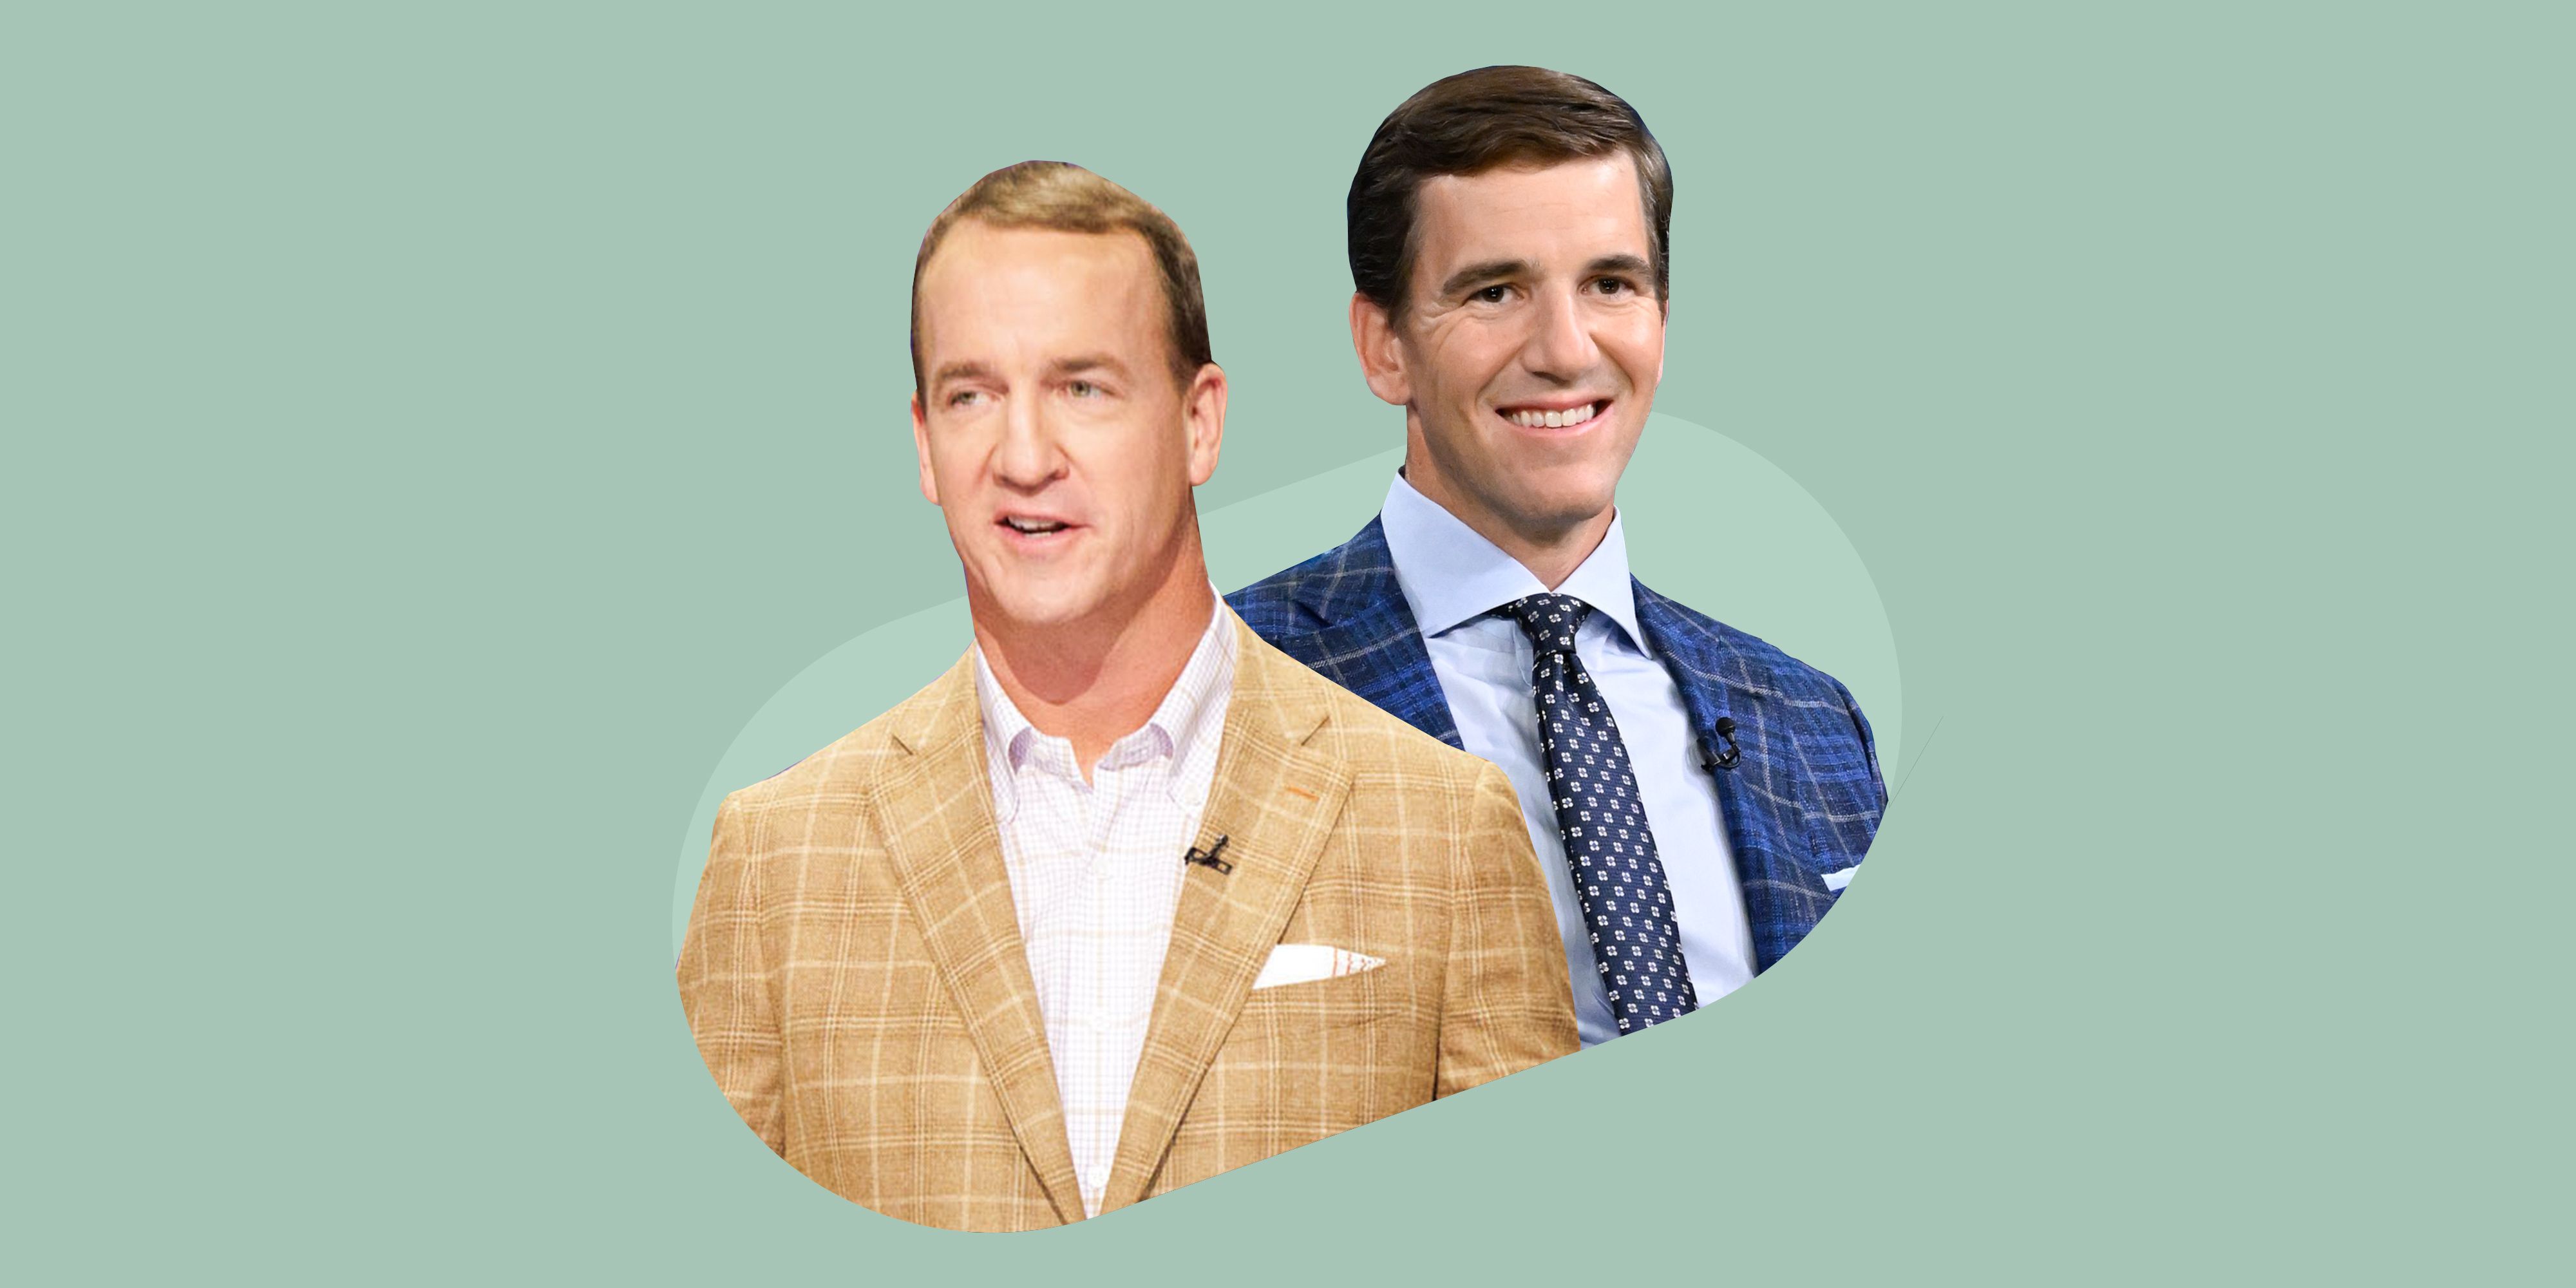 monday night football with peyton and eli television show